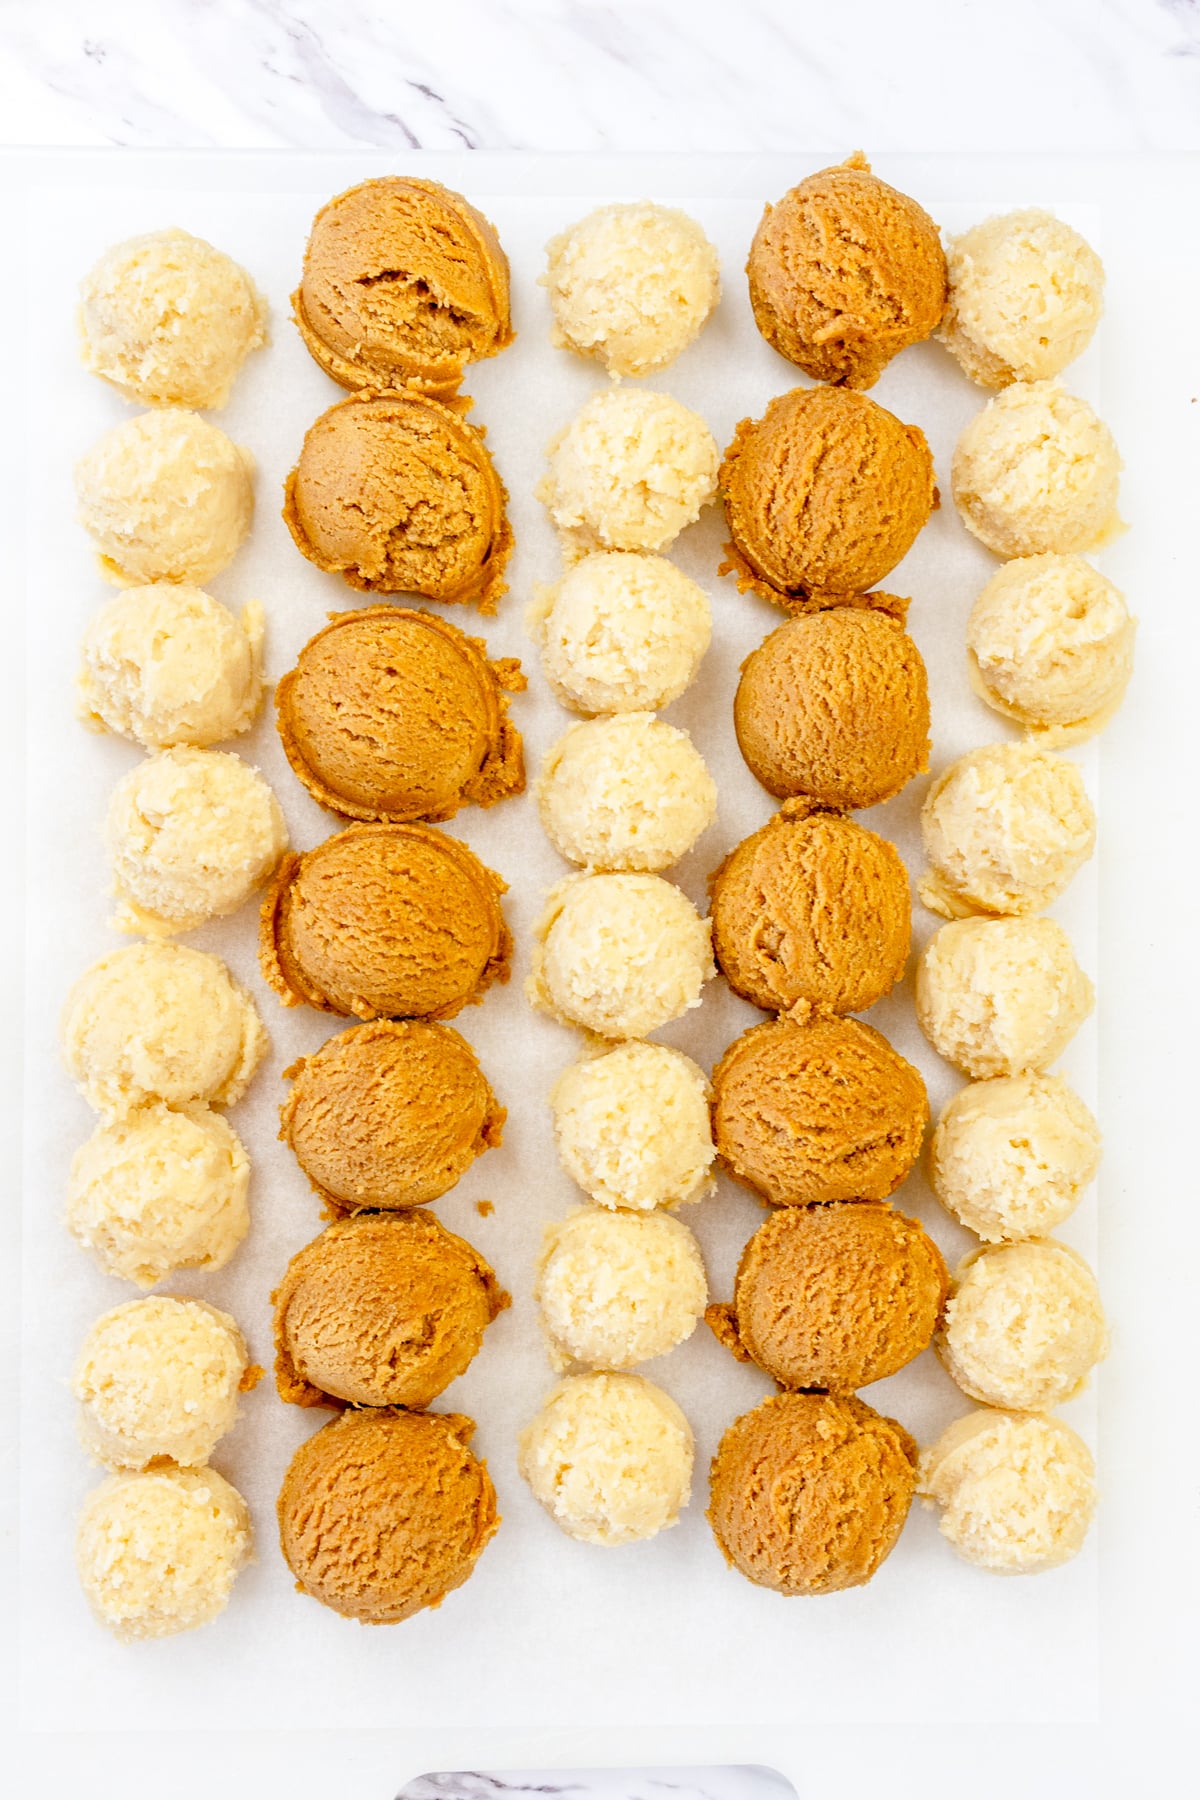 Top view of snickerdoodle cookie dough balls and gingersnap cookie dough balls lined up on a white surface.